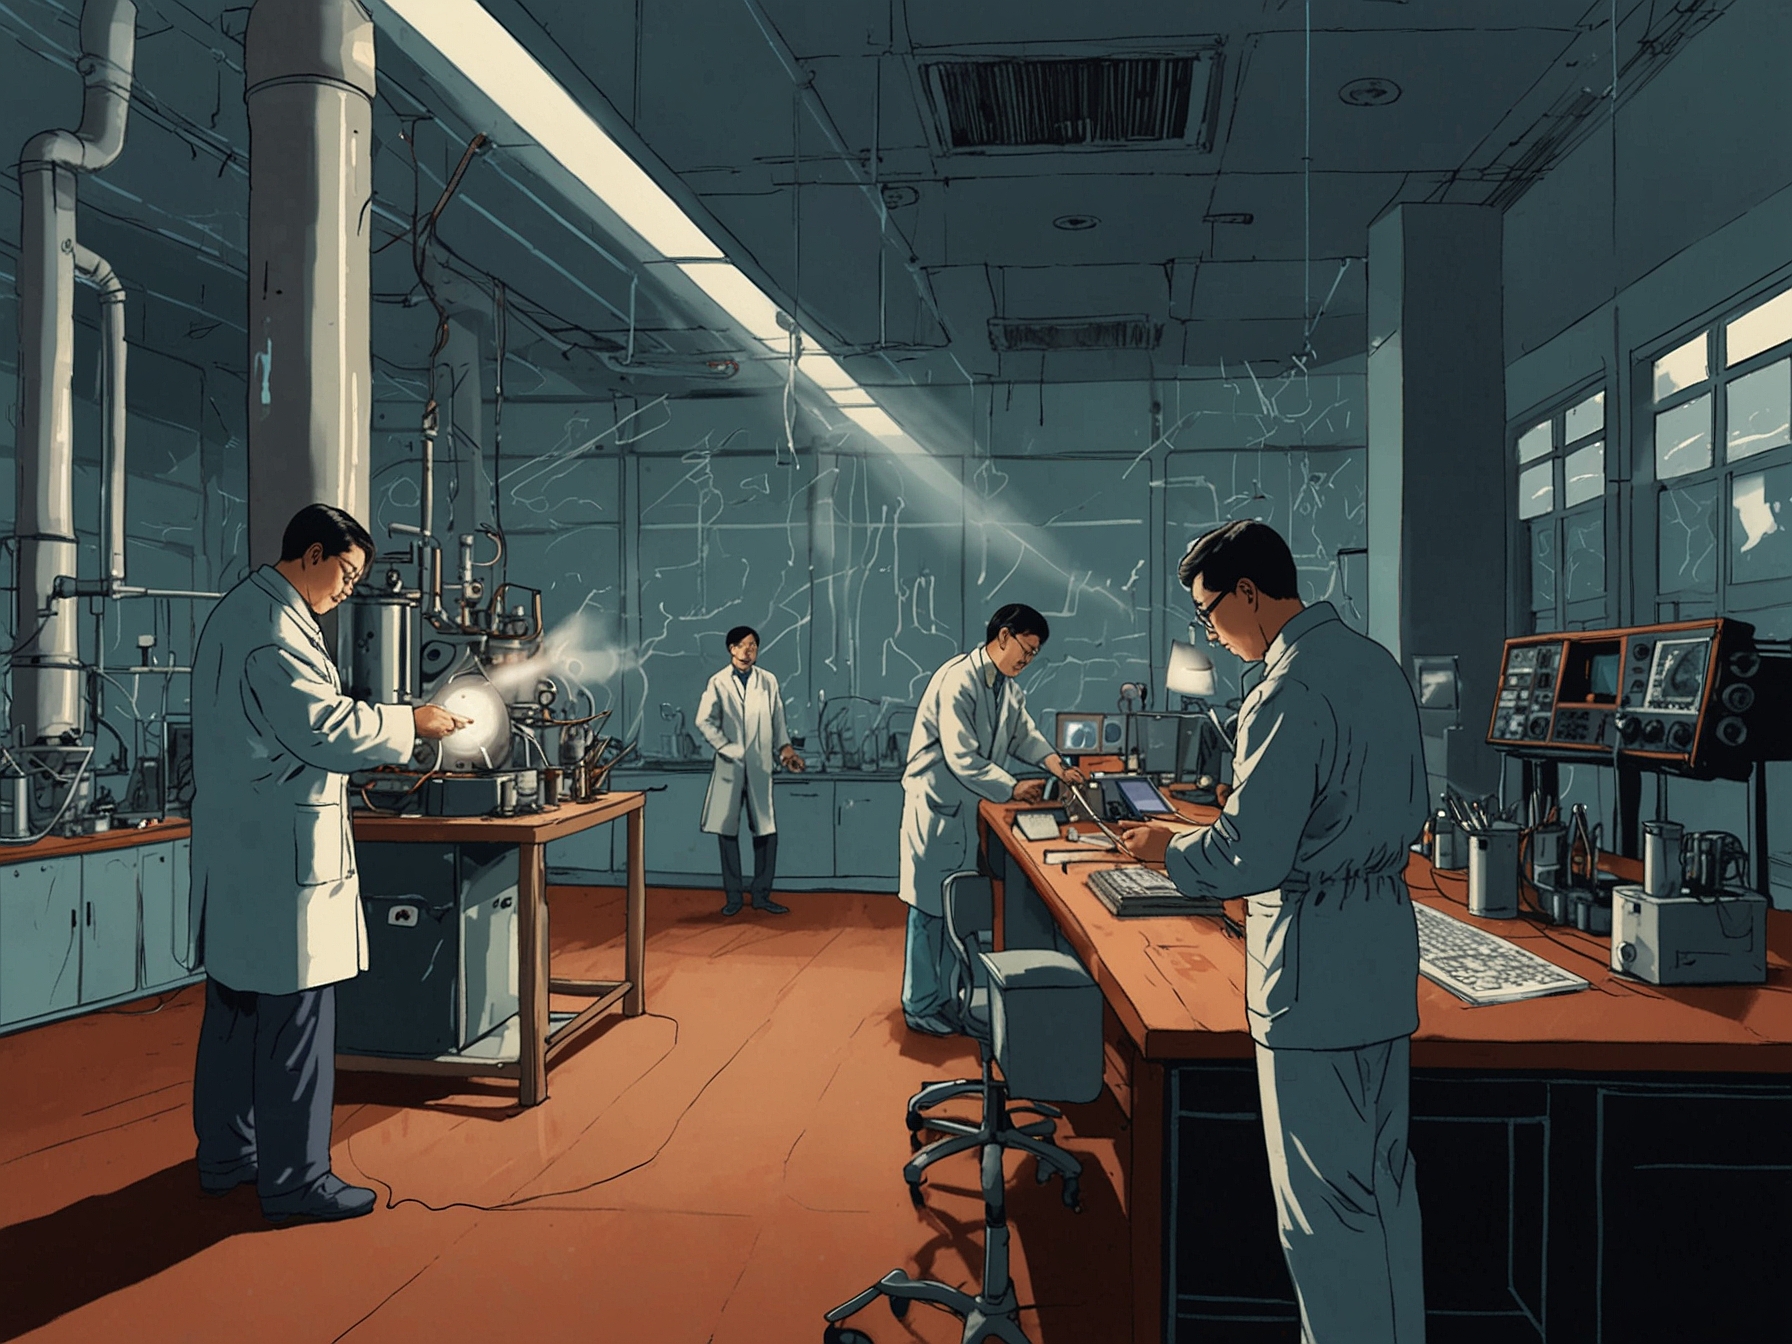 A depiction of Chinese scientists experimenting with superconducting materials in a high-tech lab, emphasizing China's strides in superconductor physics and their potential impact on energy transmission.